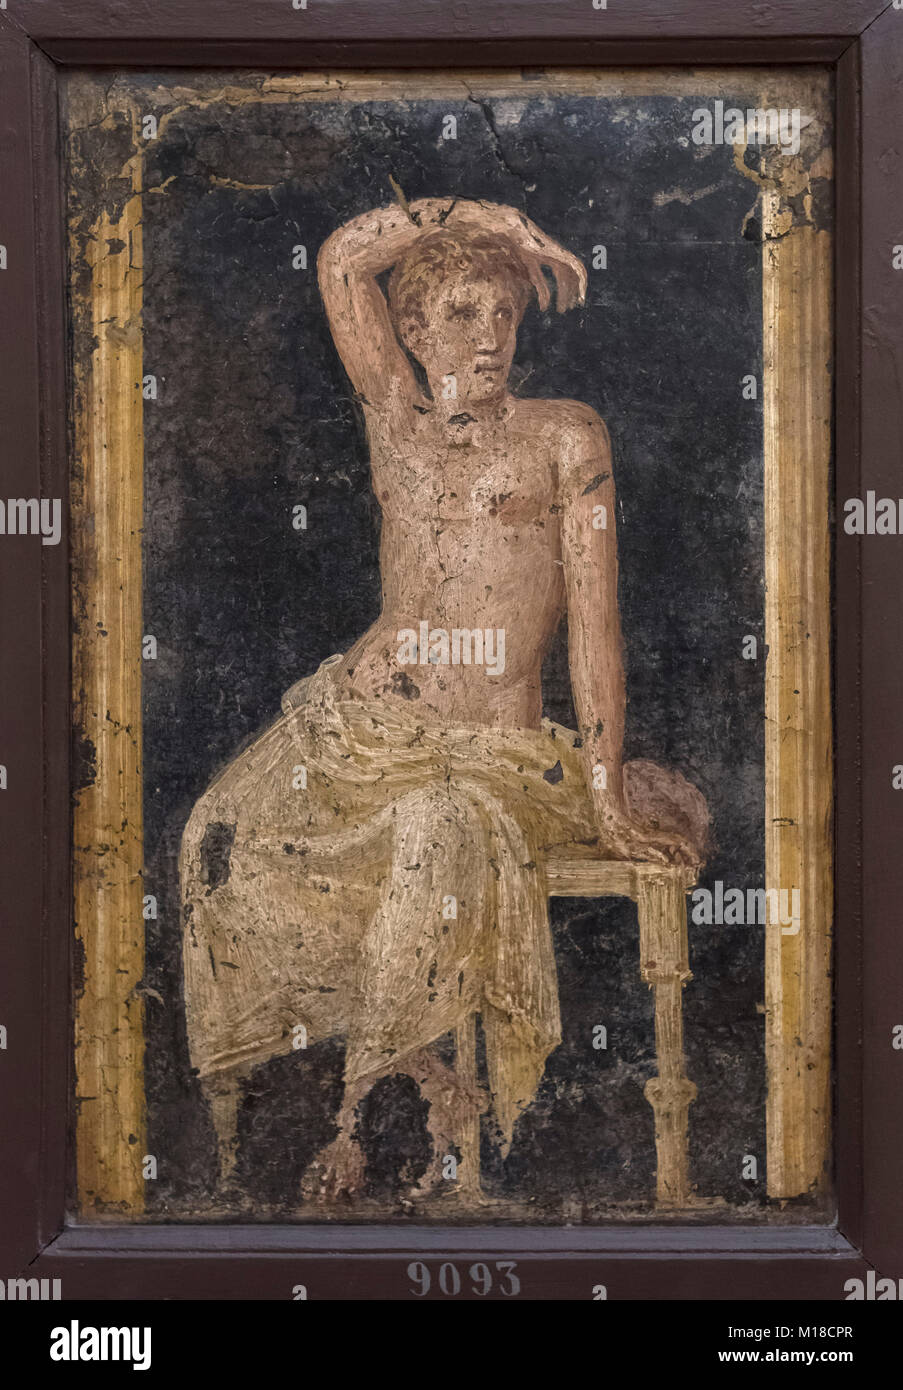 Naples. Italy. Portrait of a young man resting, 1st century A.D. Museo Archeologico Nazionale di Napoli. Naples National Archaeological Museum. Stock Photo